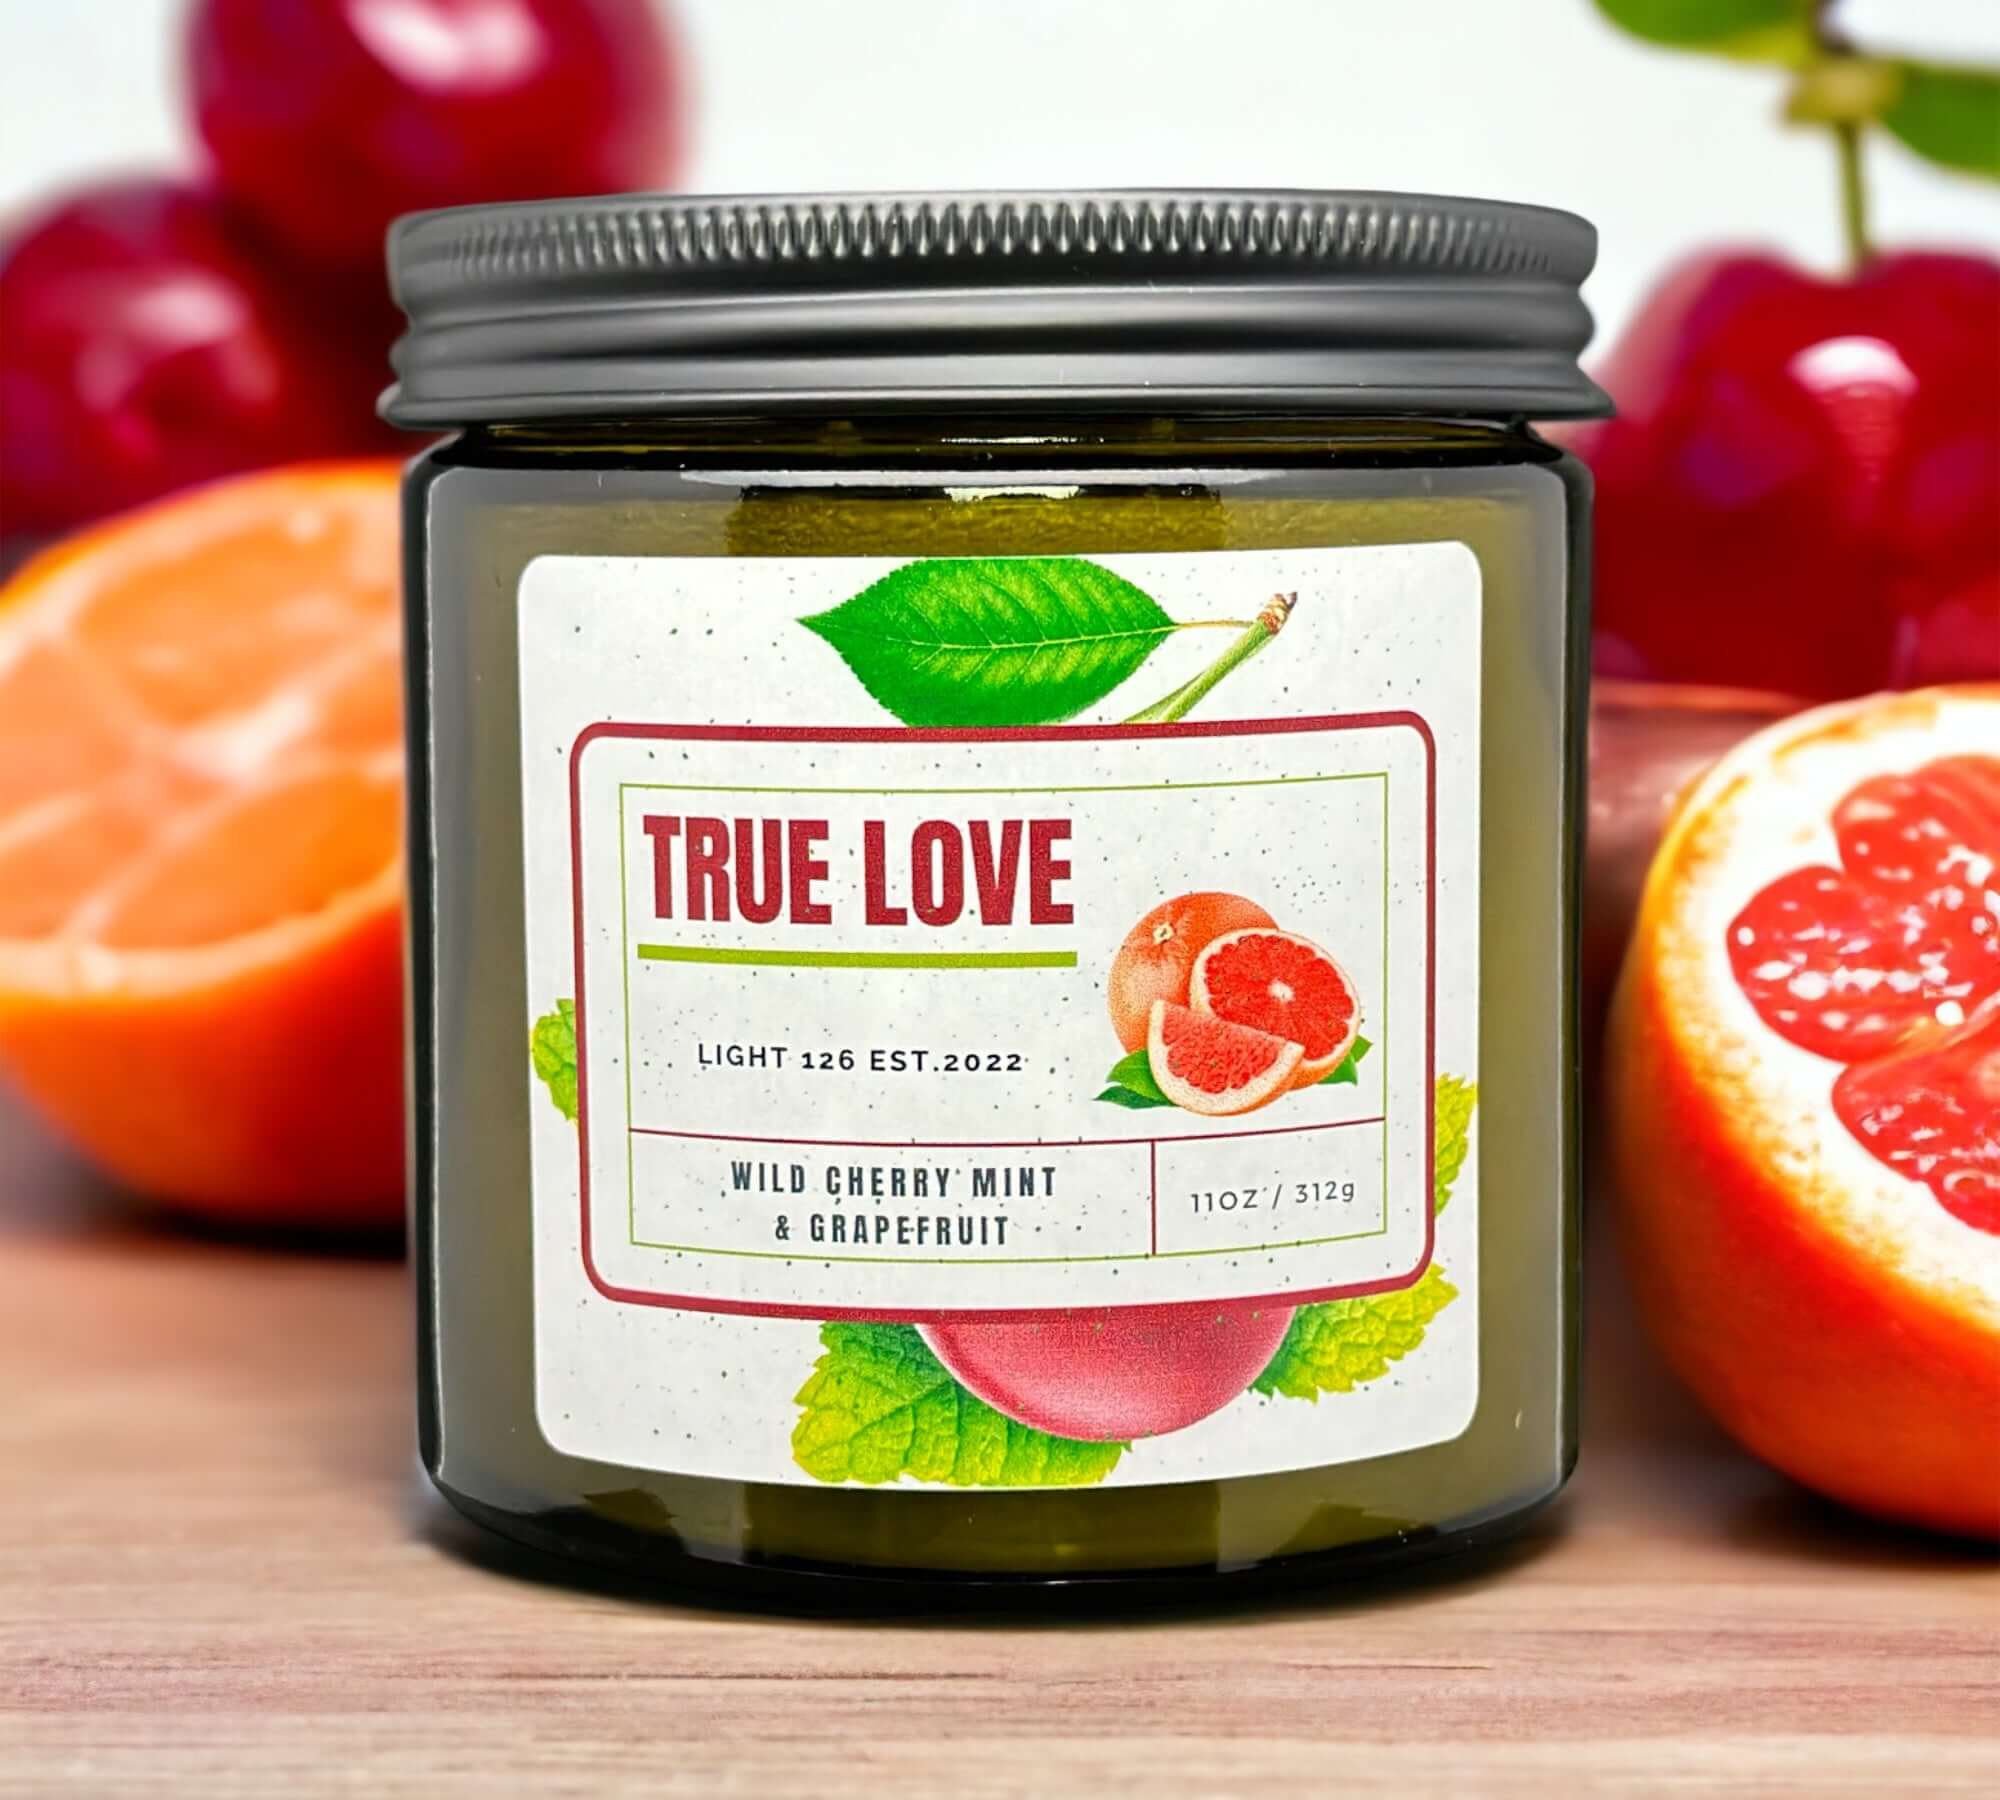 True love candle. Wild cherry, mint and grapefruit candle.